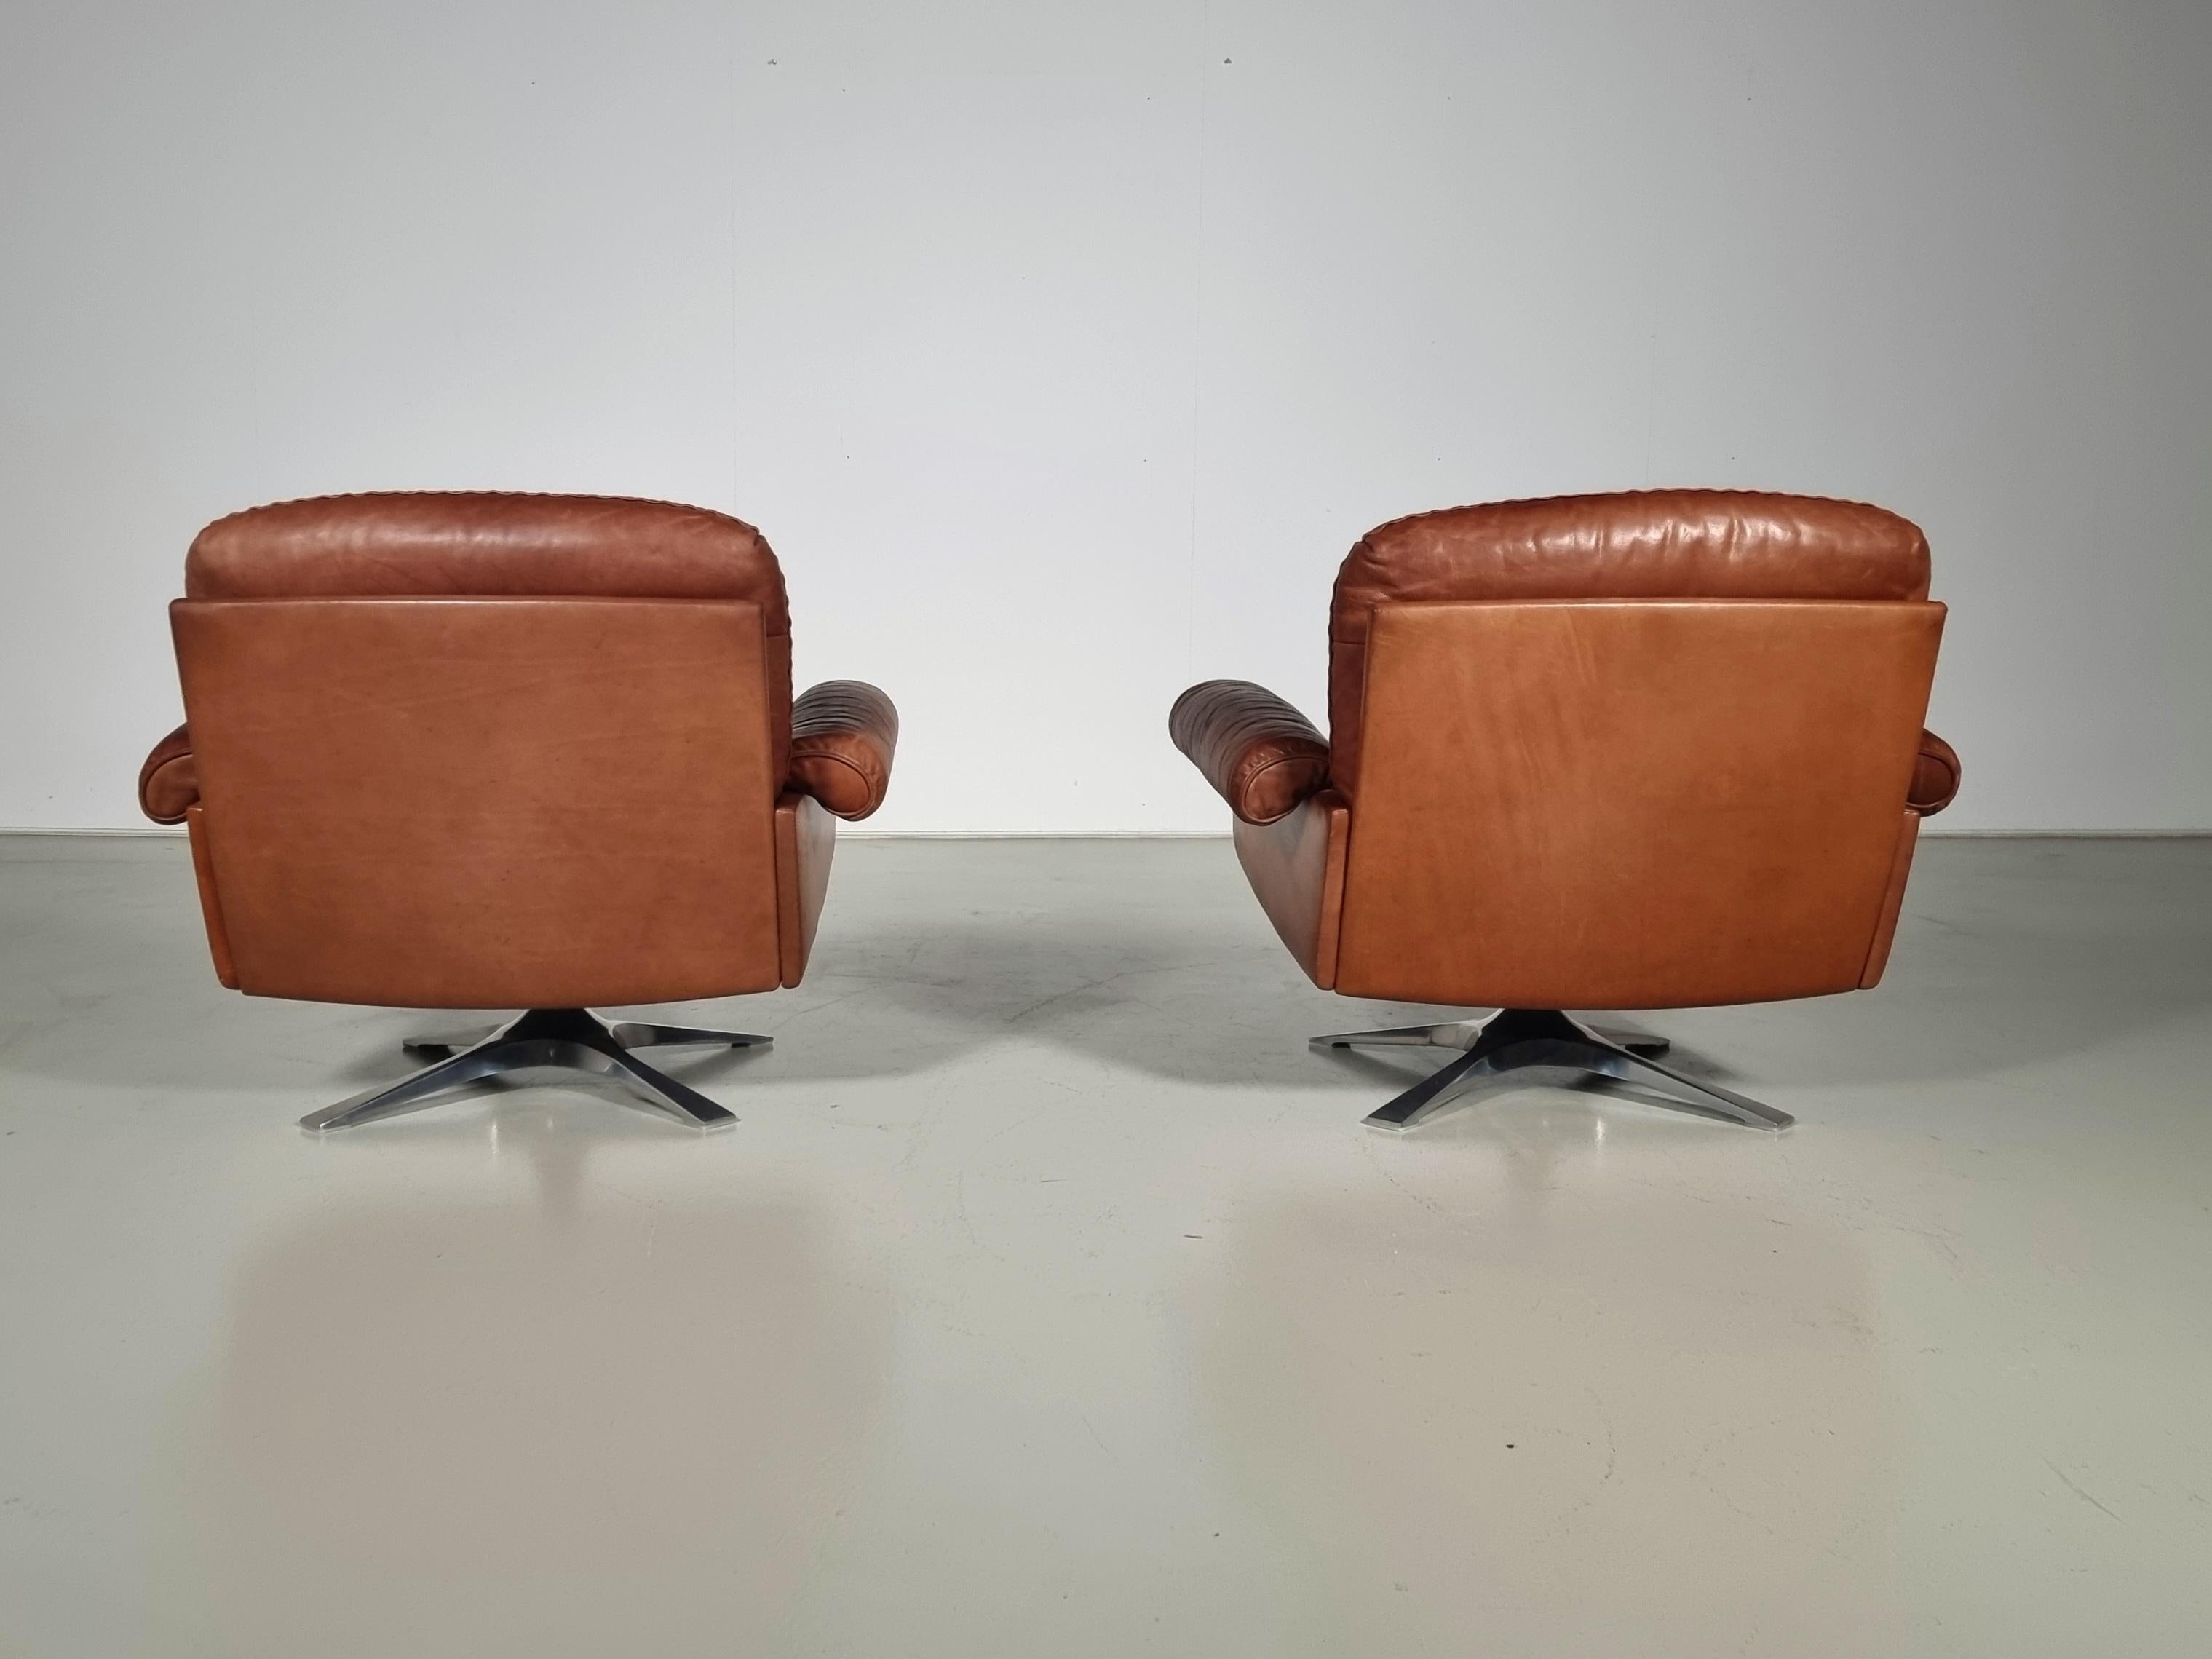 Set of 2 De Sede Ds-31 Swivel Lounge Chairs in Light Brown Leather, 1970s For Sale 1